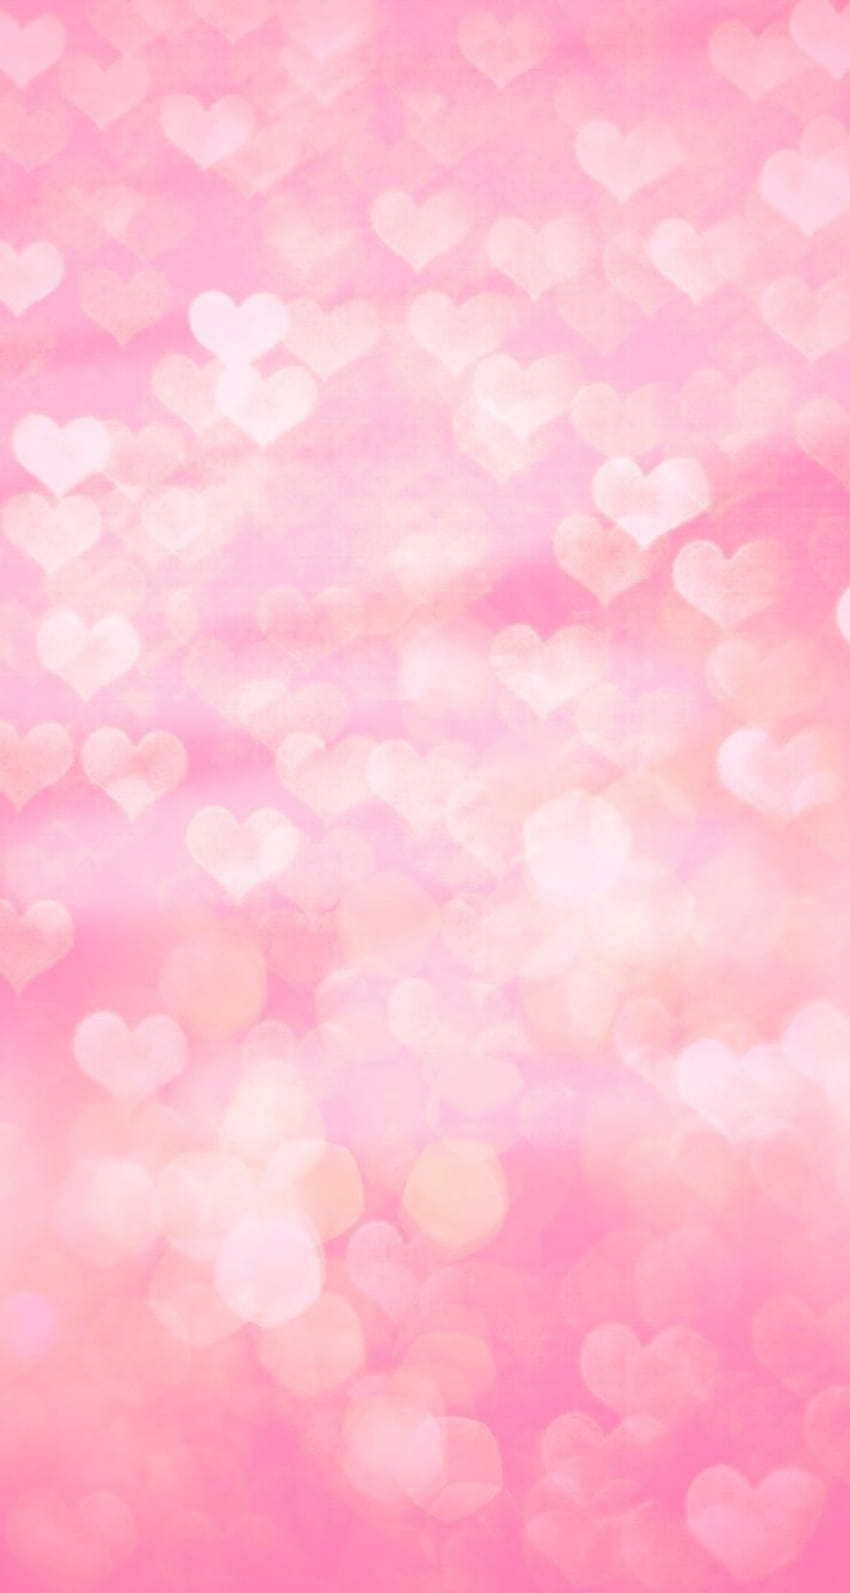 Pink Heart iPhone, pink aesthetic hearts HD phone wallpaper